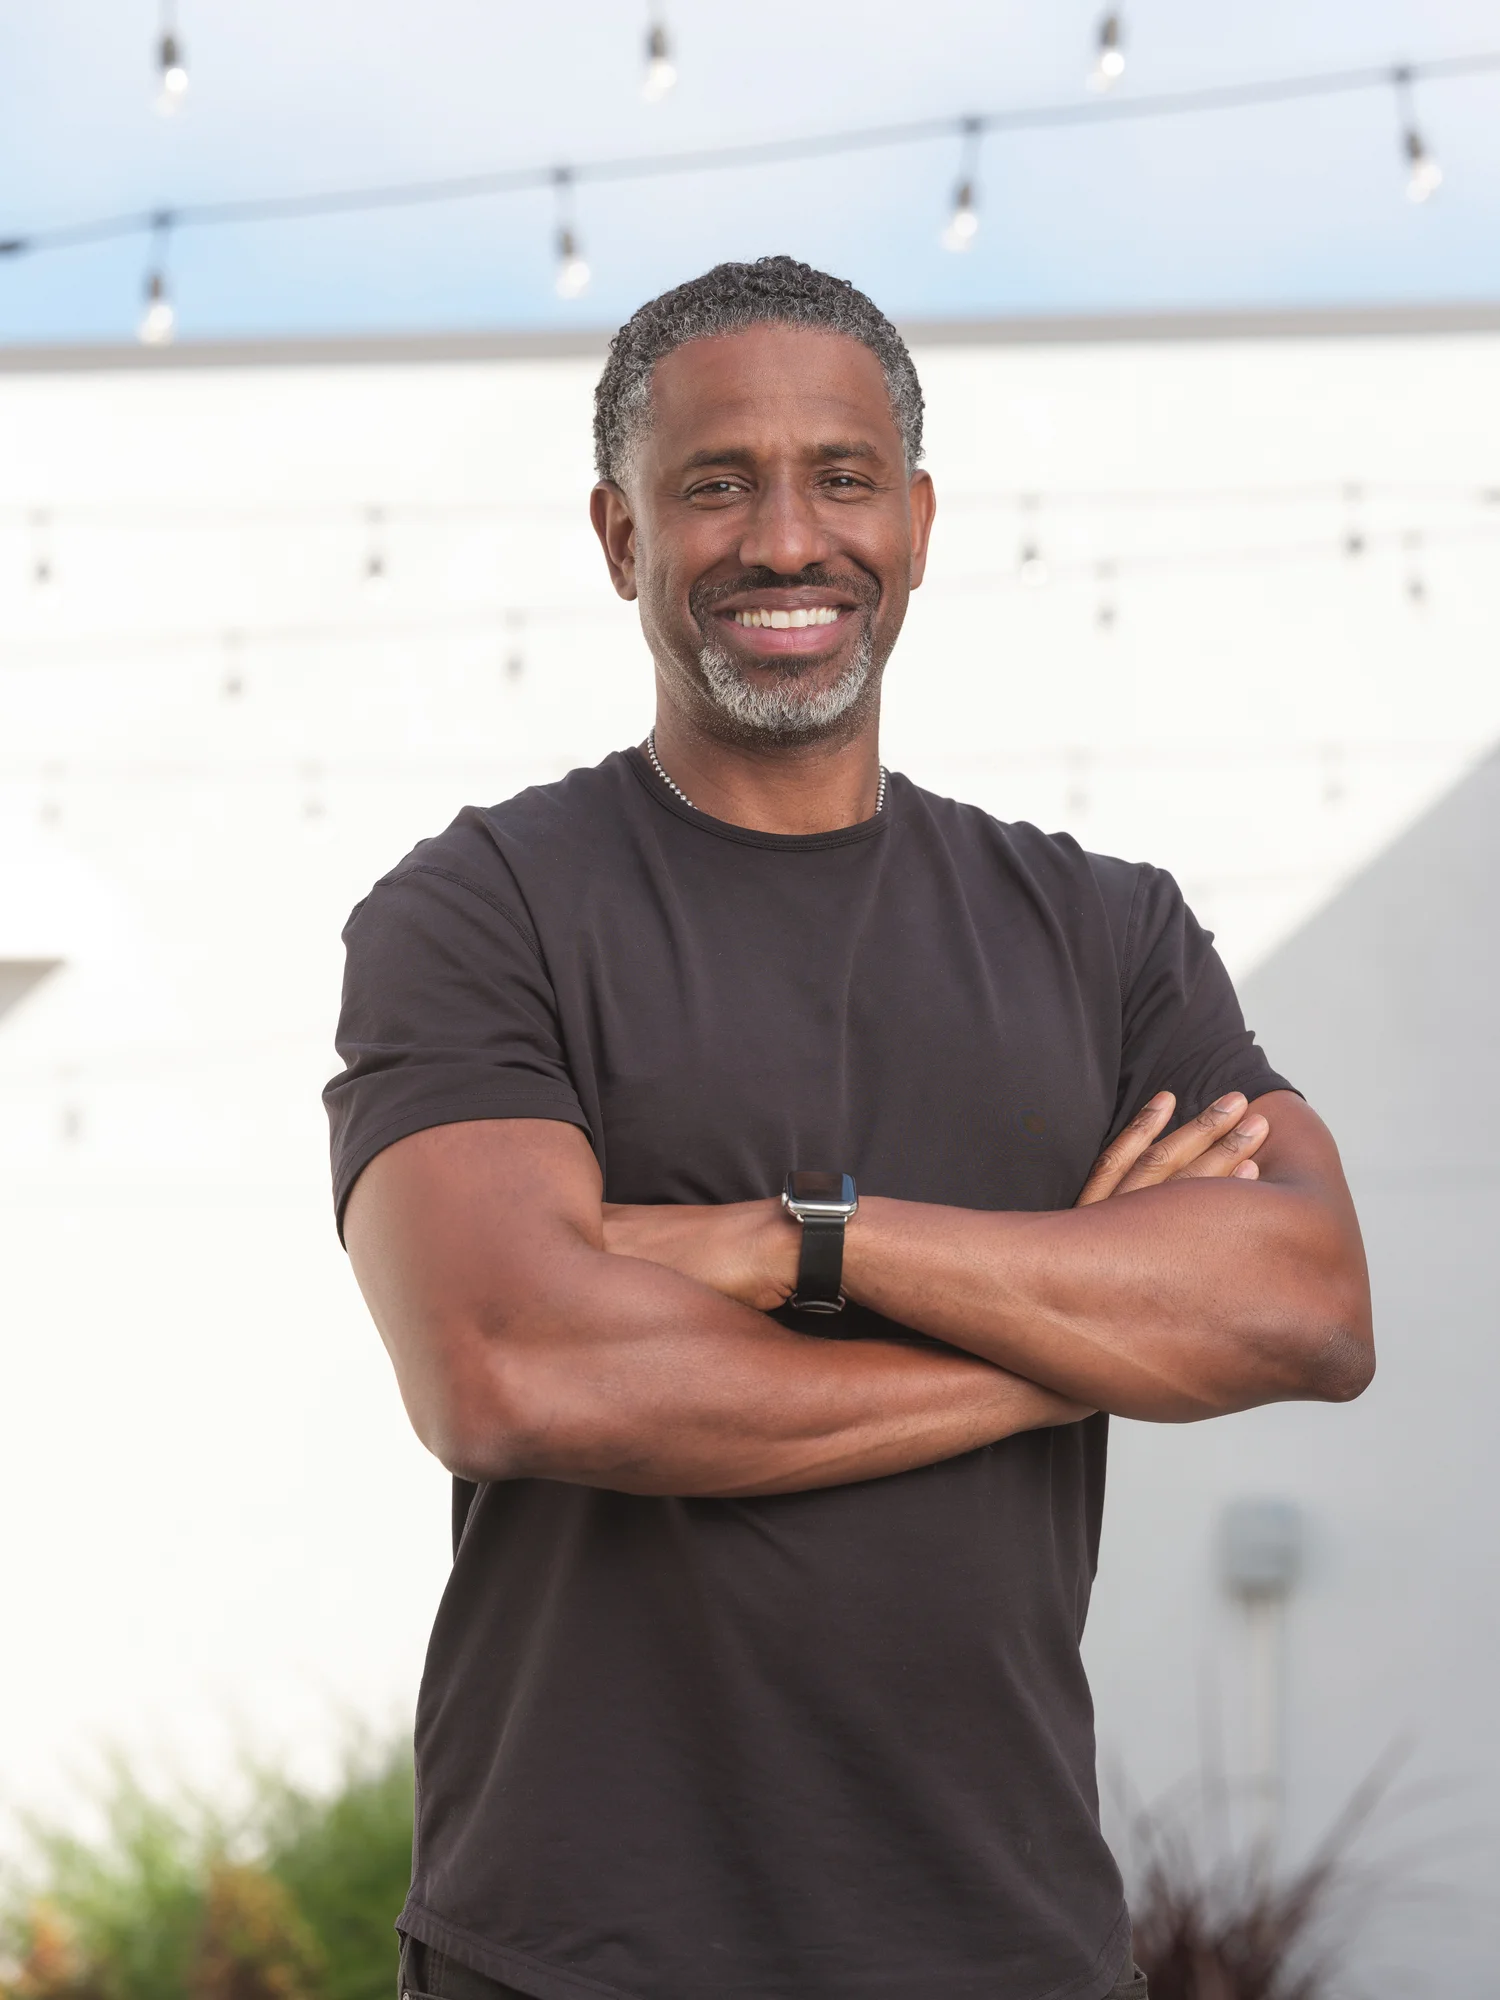 Hamet Watt folds his arms and smiles into the camera. There is a white wall behind him, as well as some hanging lights. He is wearing a black t-shirt.